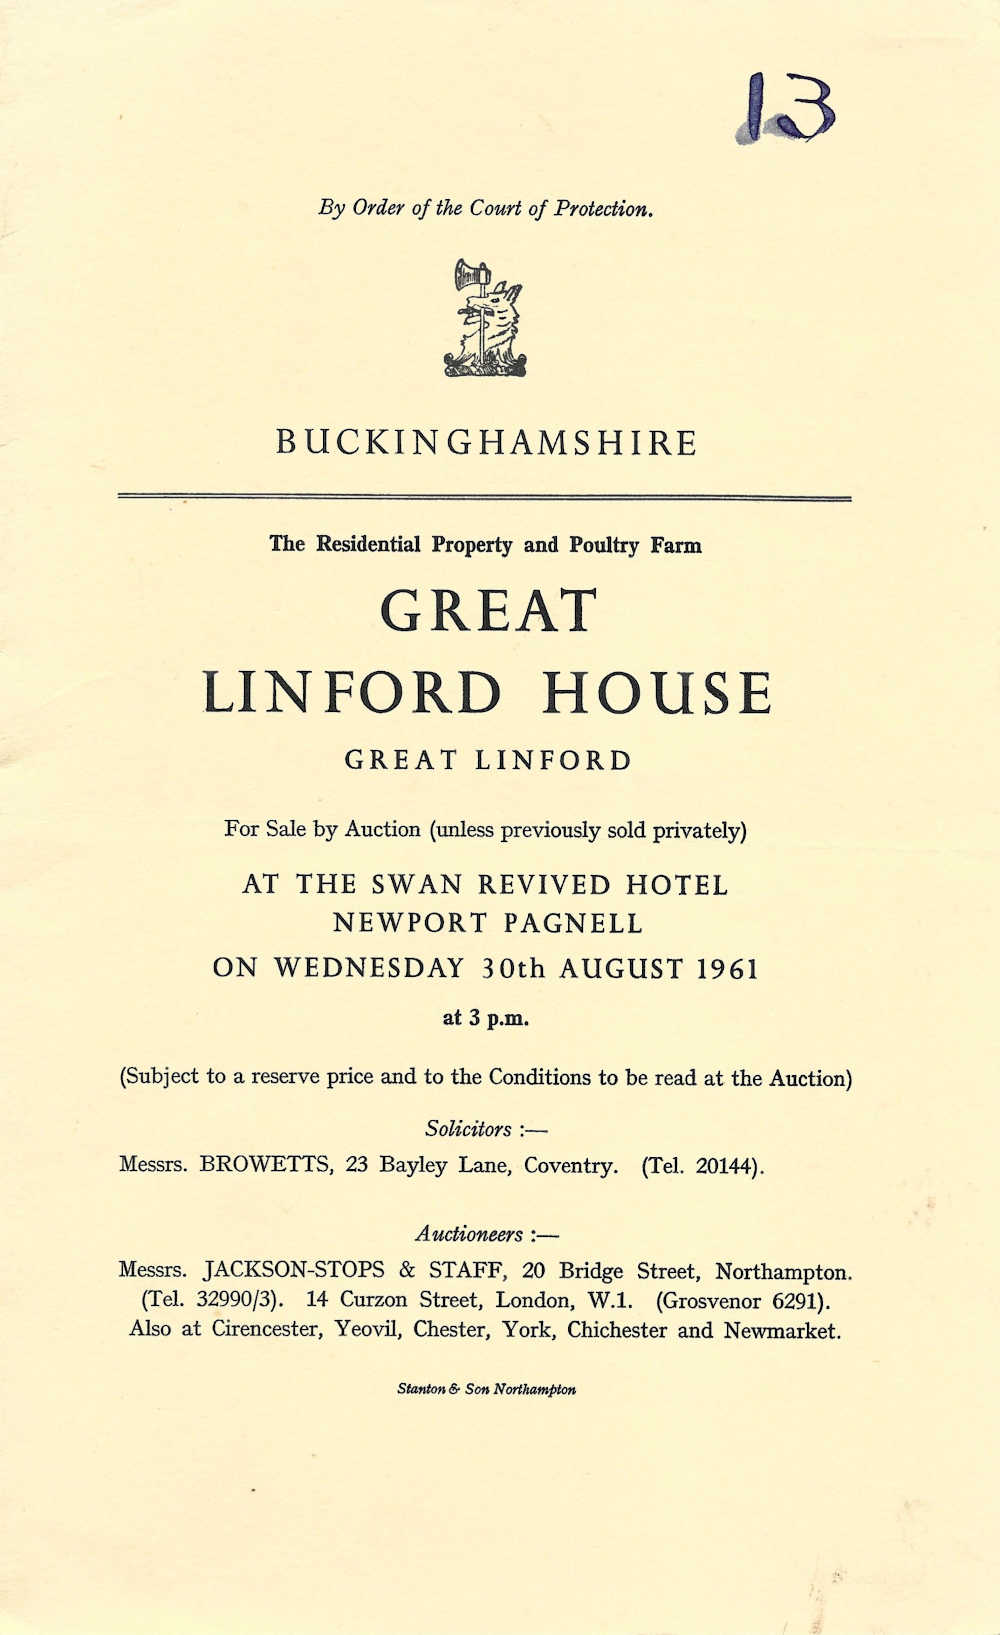 Great Linford House 1961 sales brochure cover.